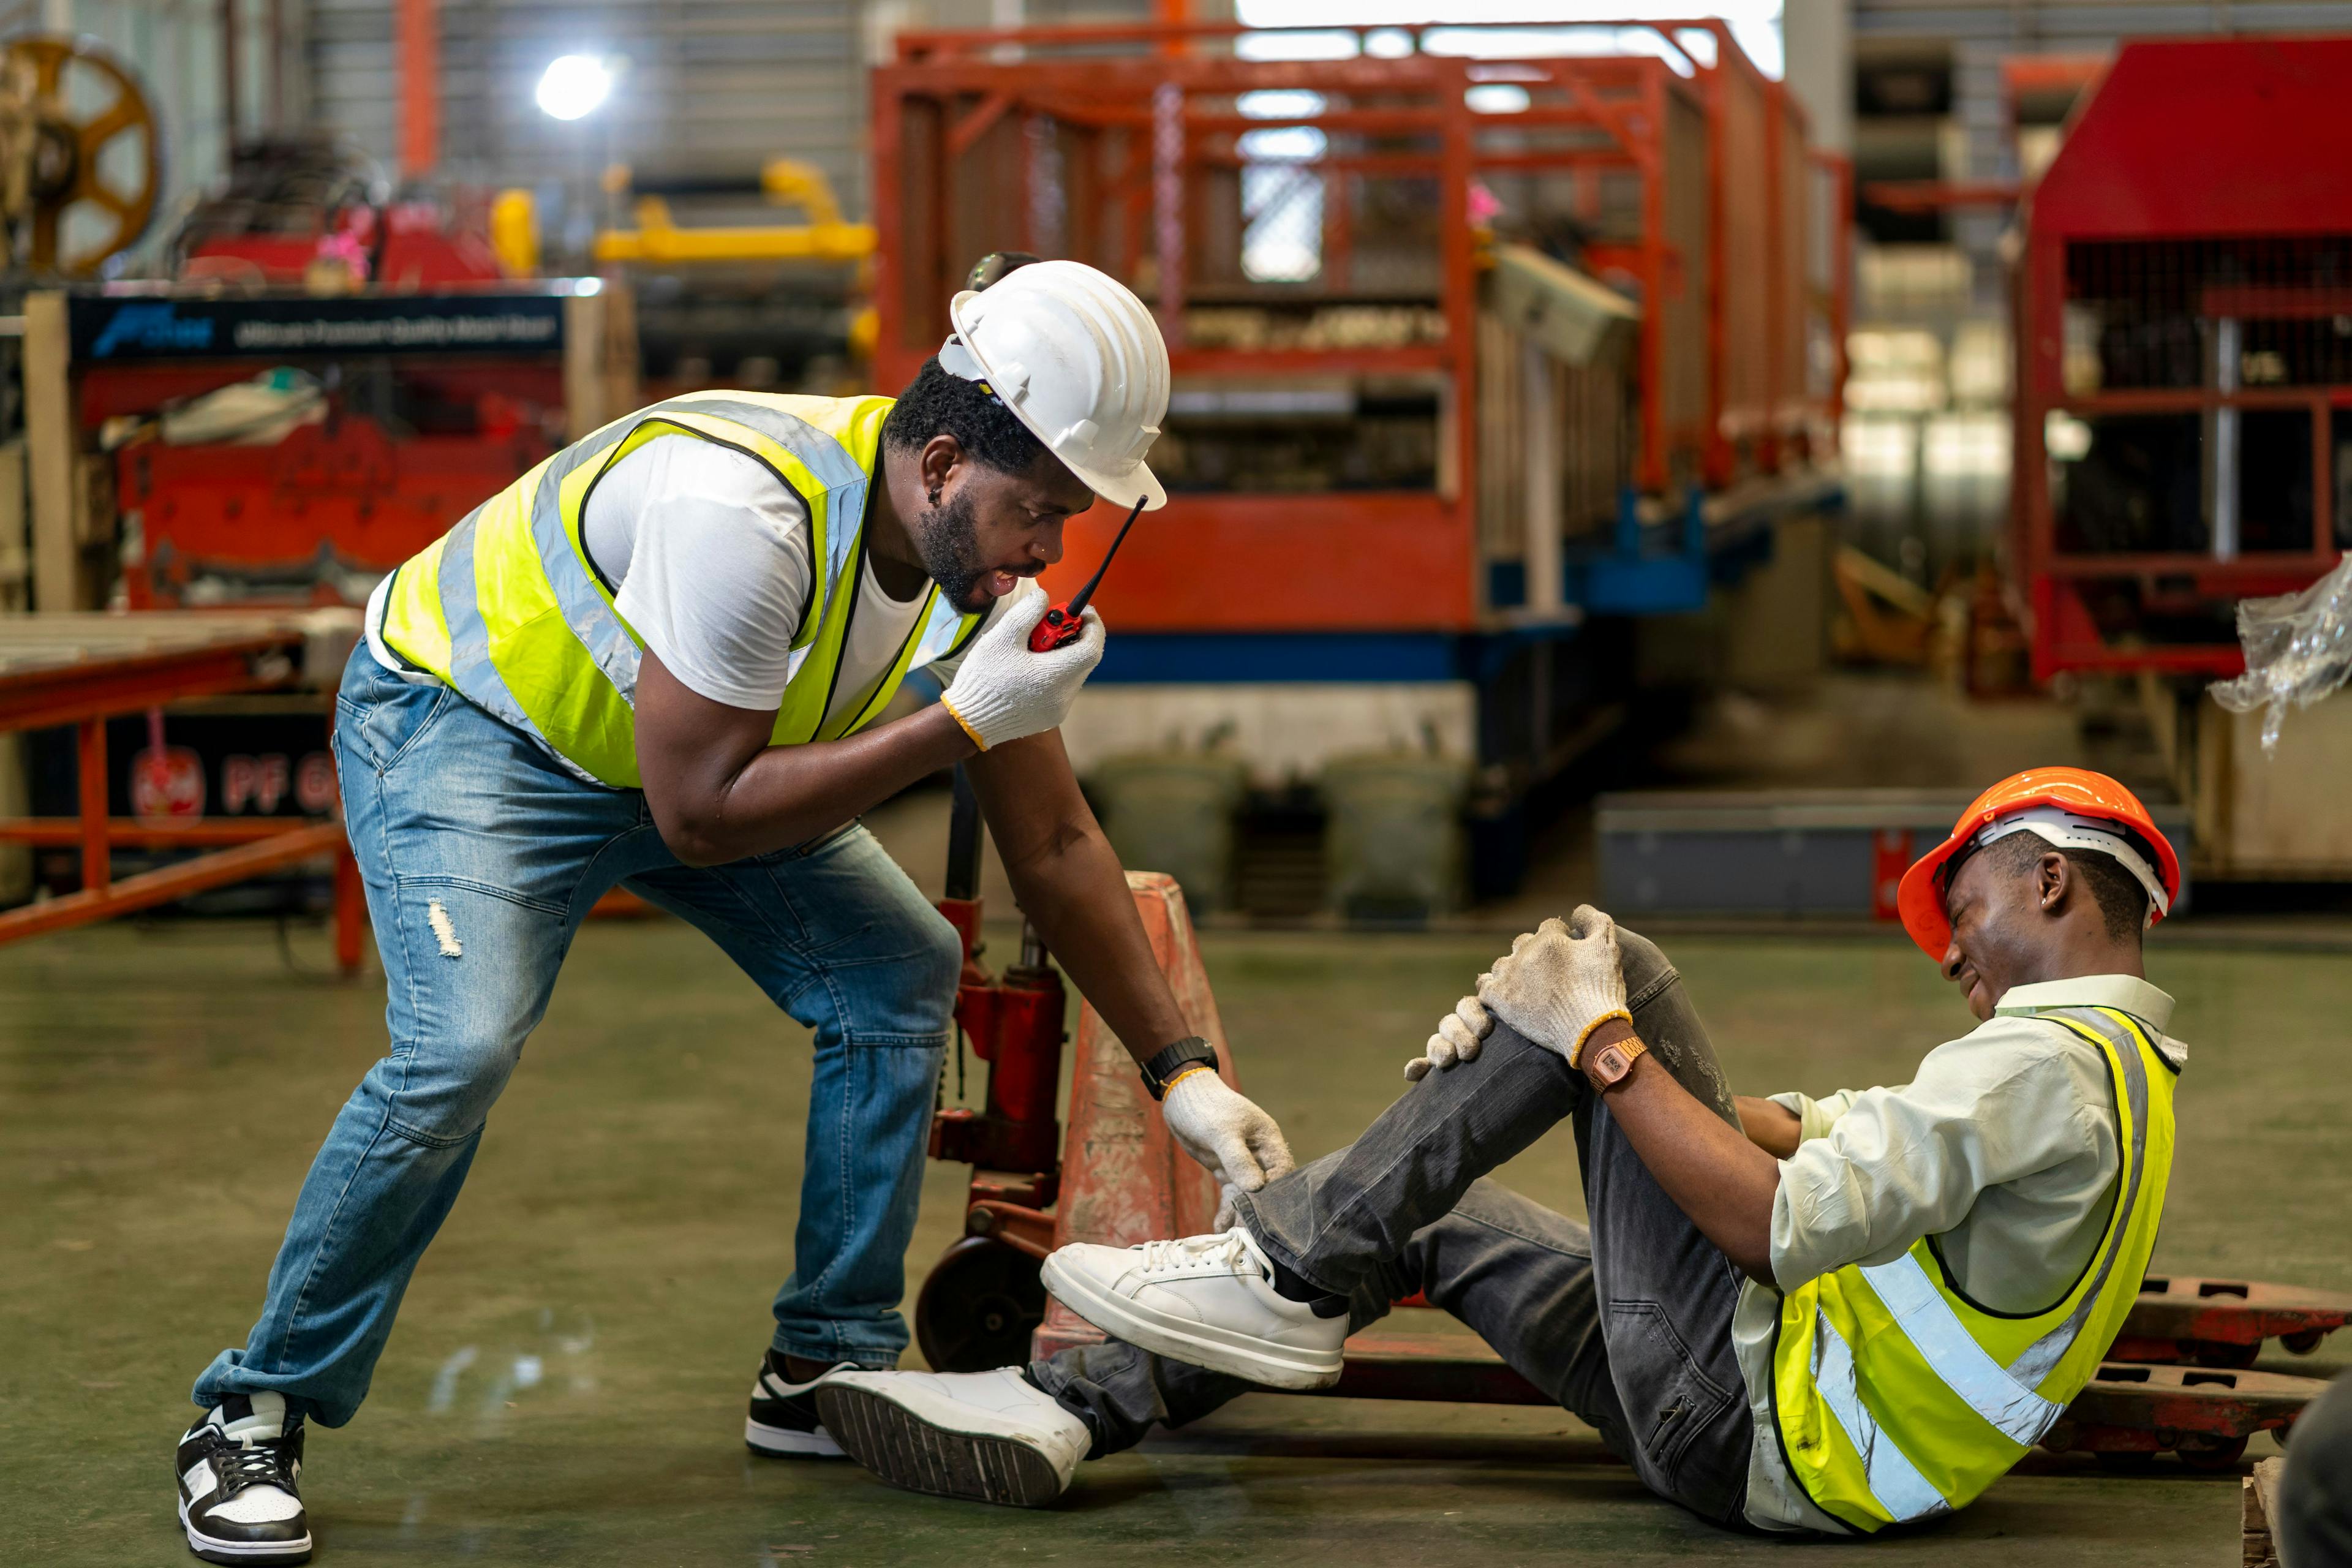 Image related to Workplace Injuries: Workers' Compensation and Employer Responsibility